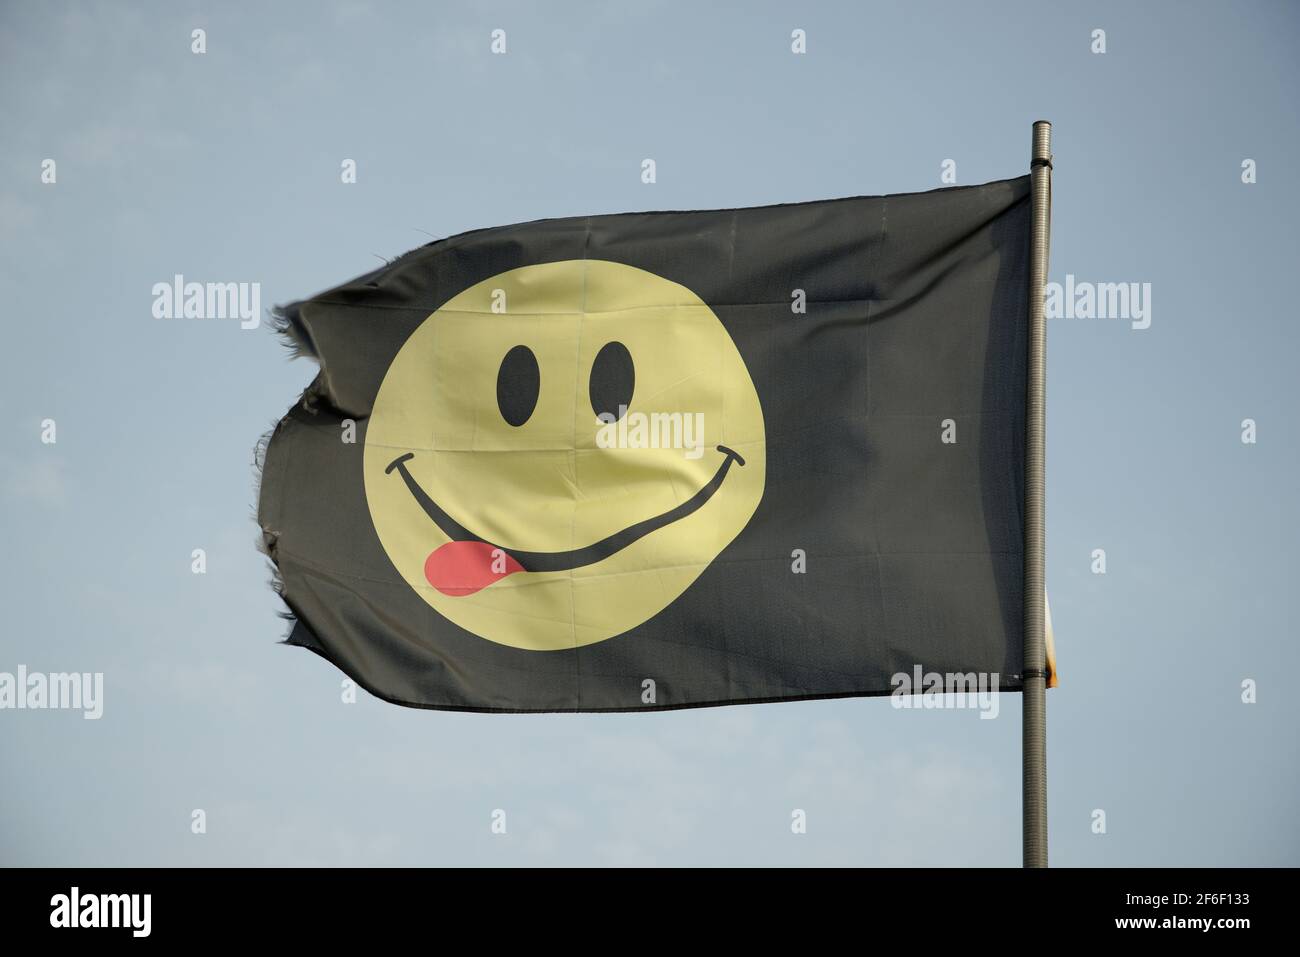 Ein Smiley Face House Music Flag. Happy Face Festival Symbol mit roter Zunge! Lecker, lecker. Stockfoto